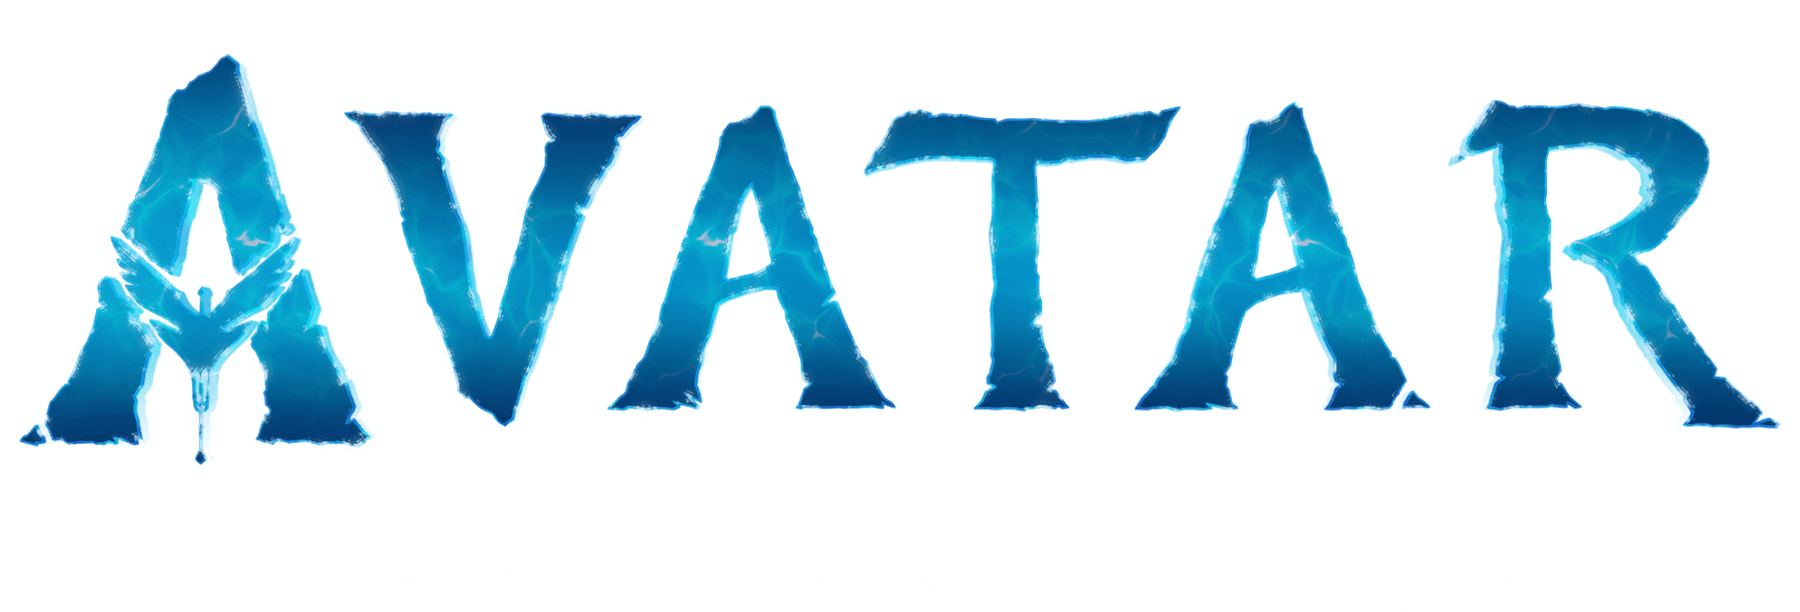 Avatar: The Deep Dive - A Special Edition of 20/20 logo